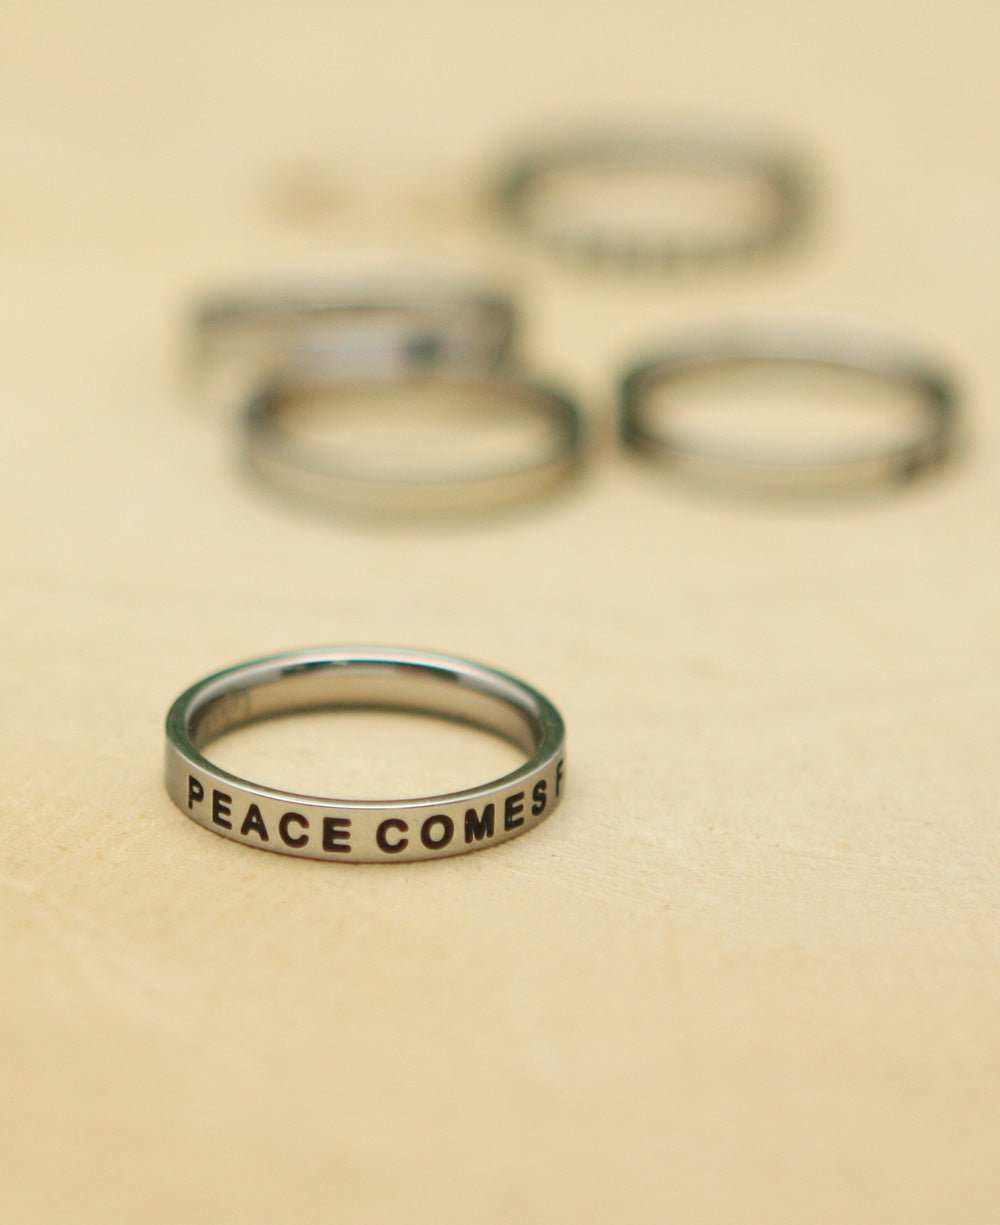 Inspirational Inscribed Ring, Peace Comes From Within - Rings Size 6